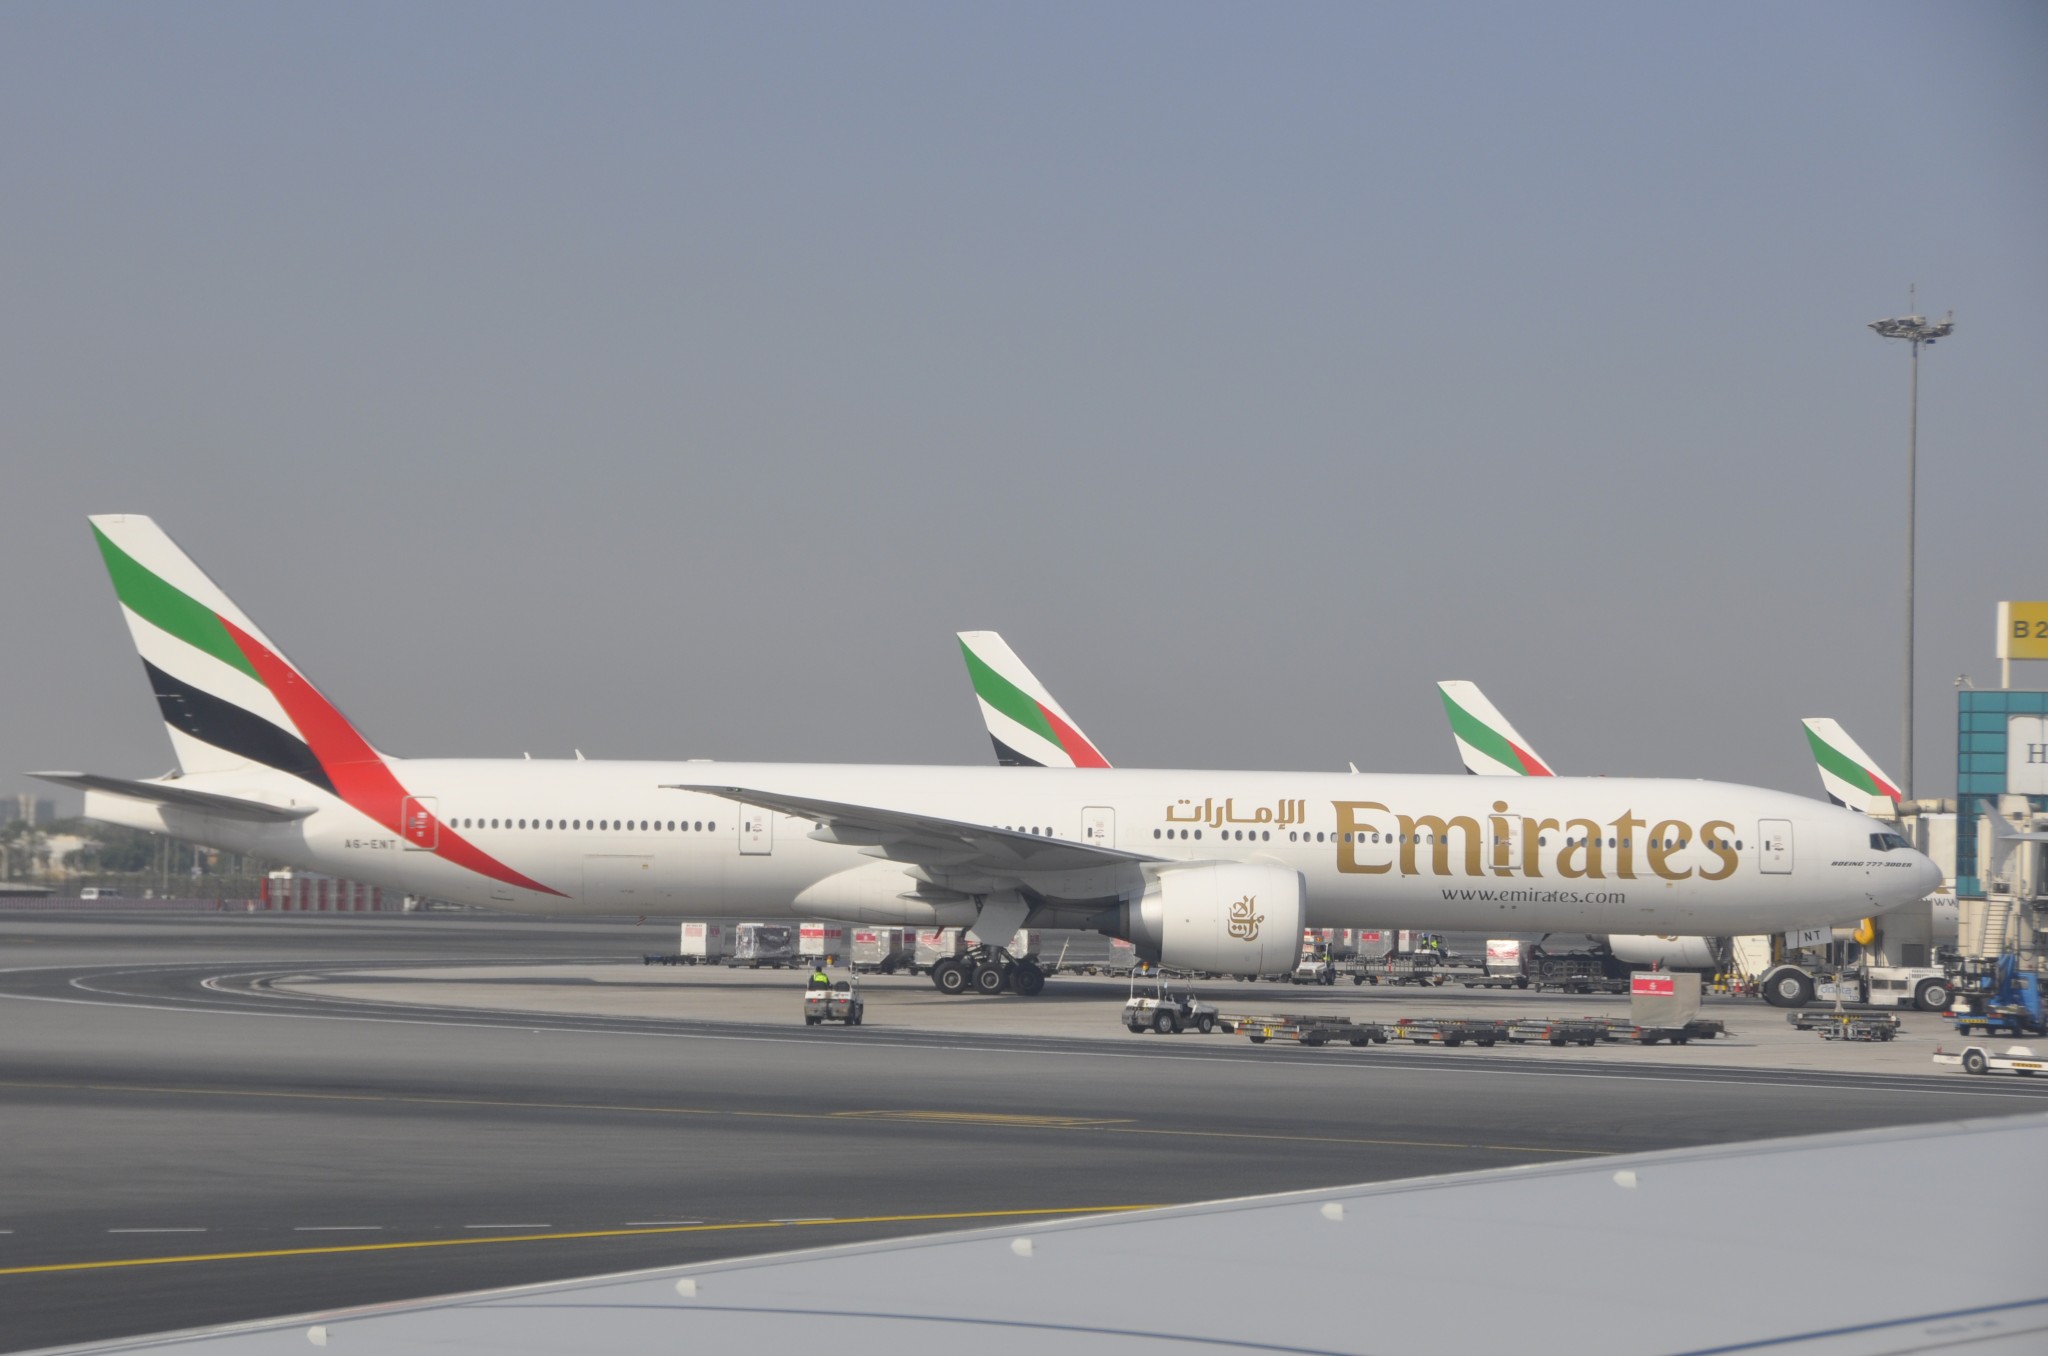 Emirates launches second gateway to Canada with Dubai-Montreal route